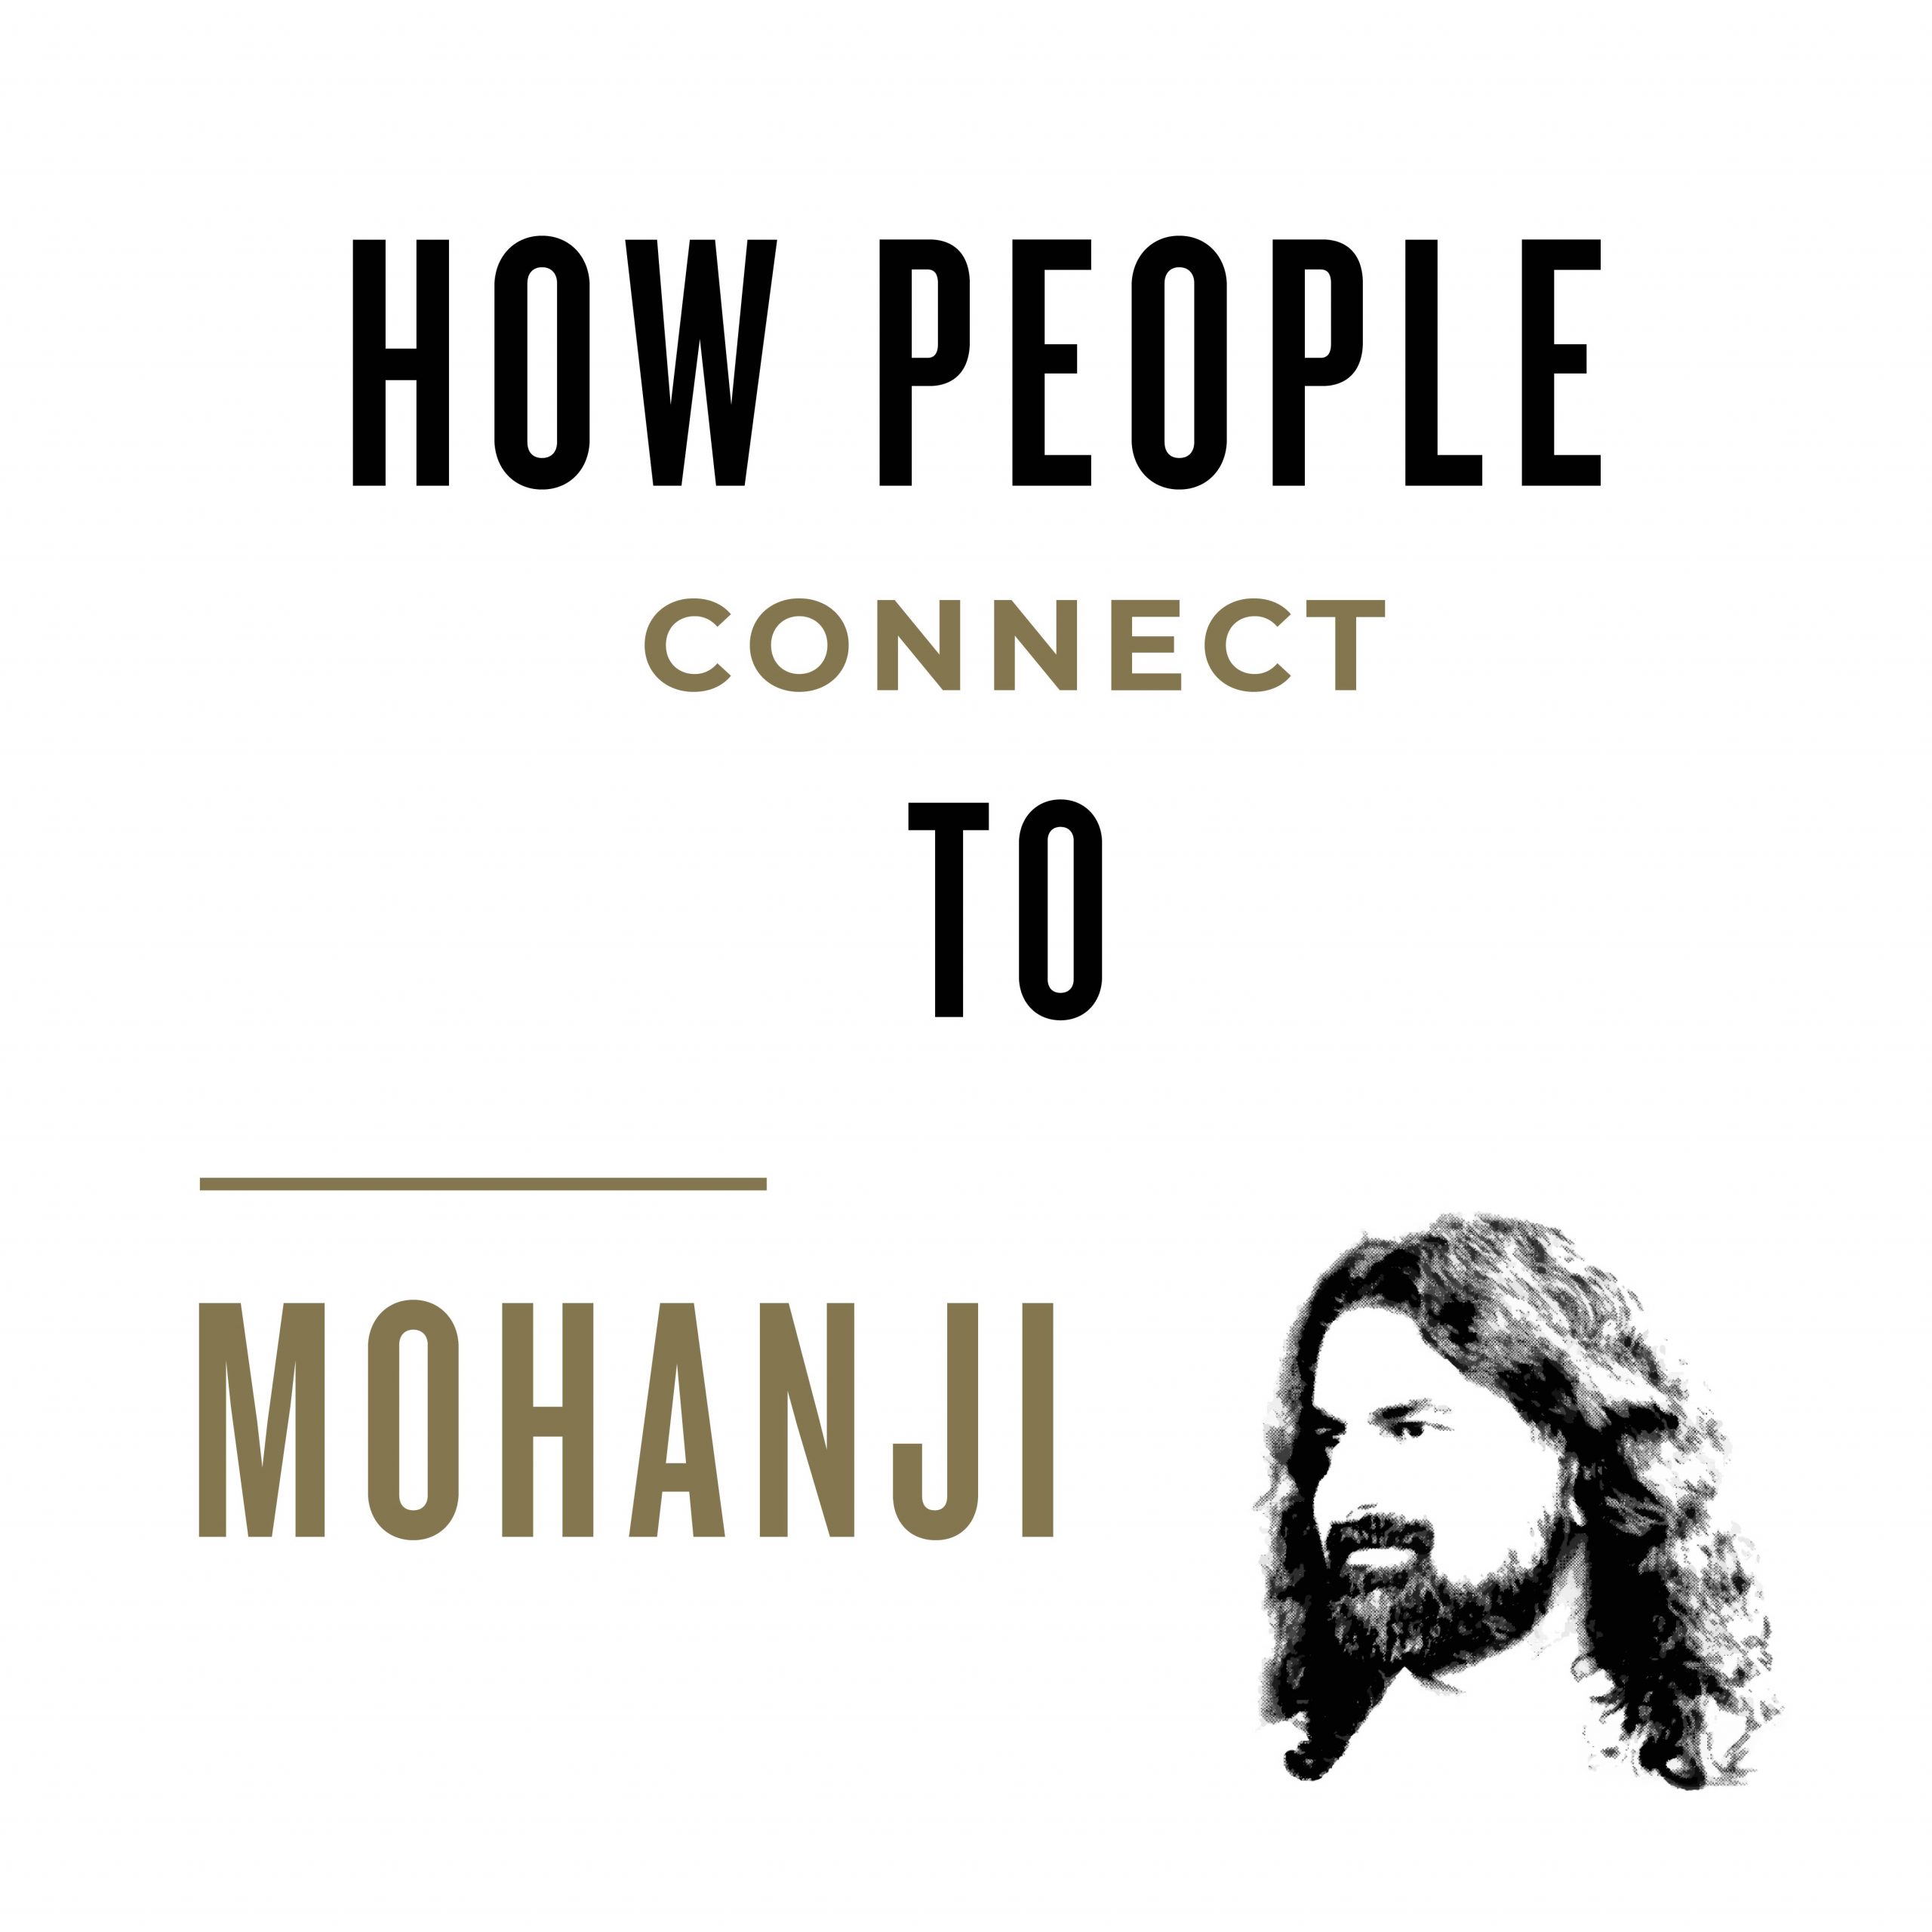 MS53_How_people_connect_to_Mohanji-0196hsl